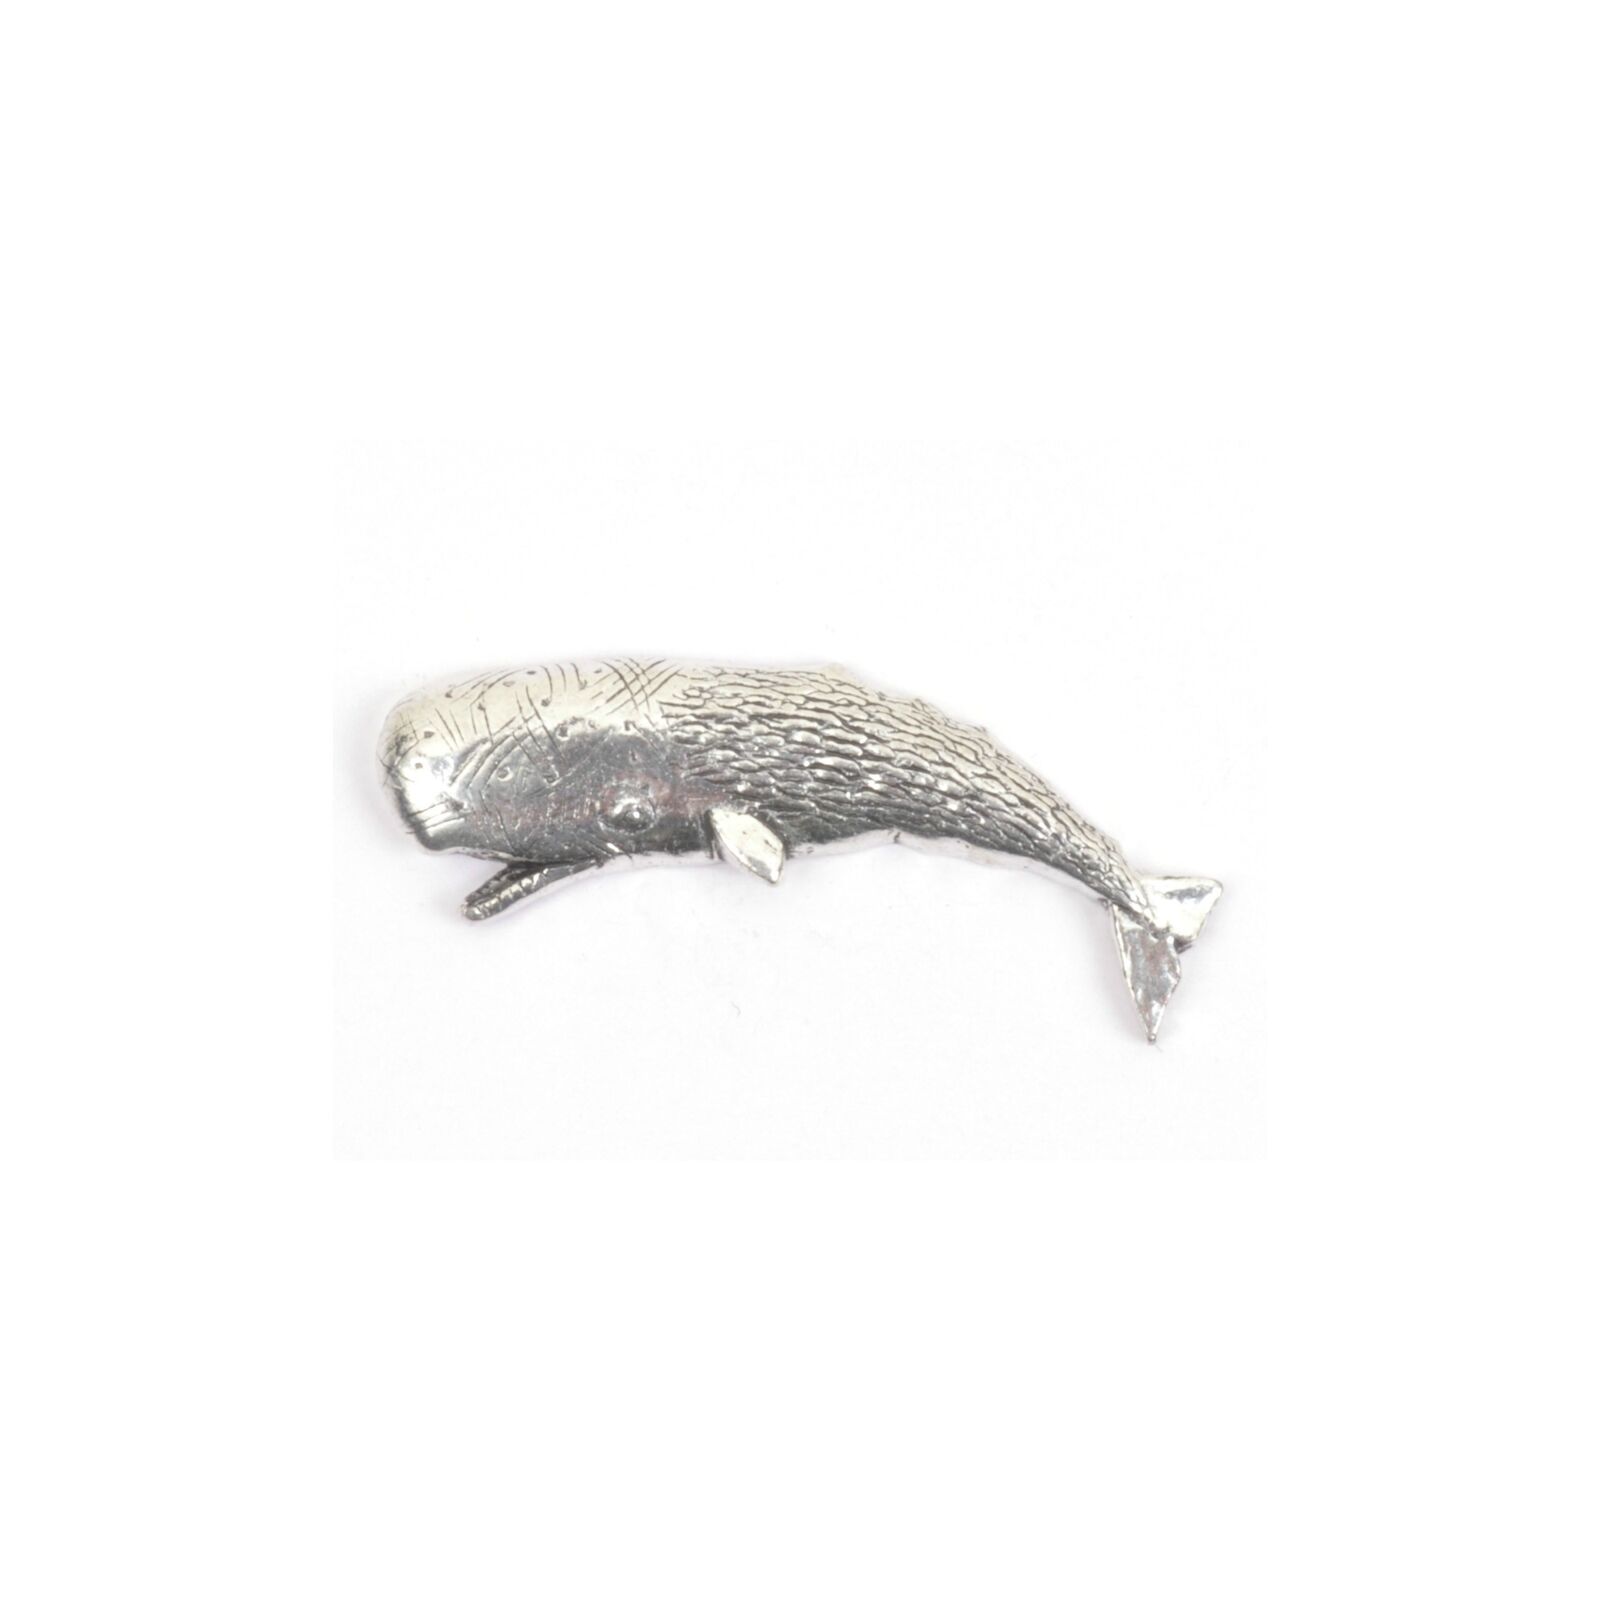 Sperm Whale Pewter Lapel Pin Badge/Brooch Cute Gift BNWT/NEW